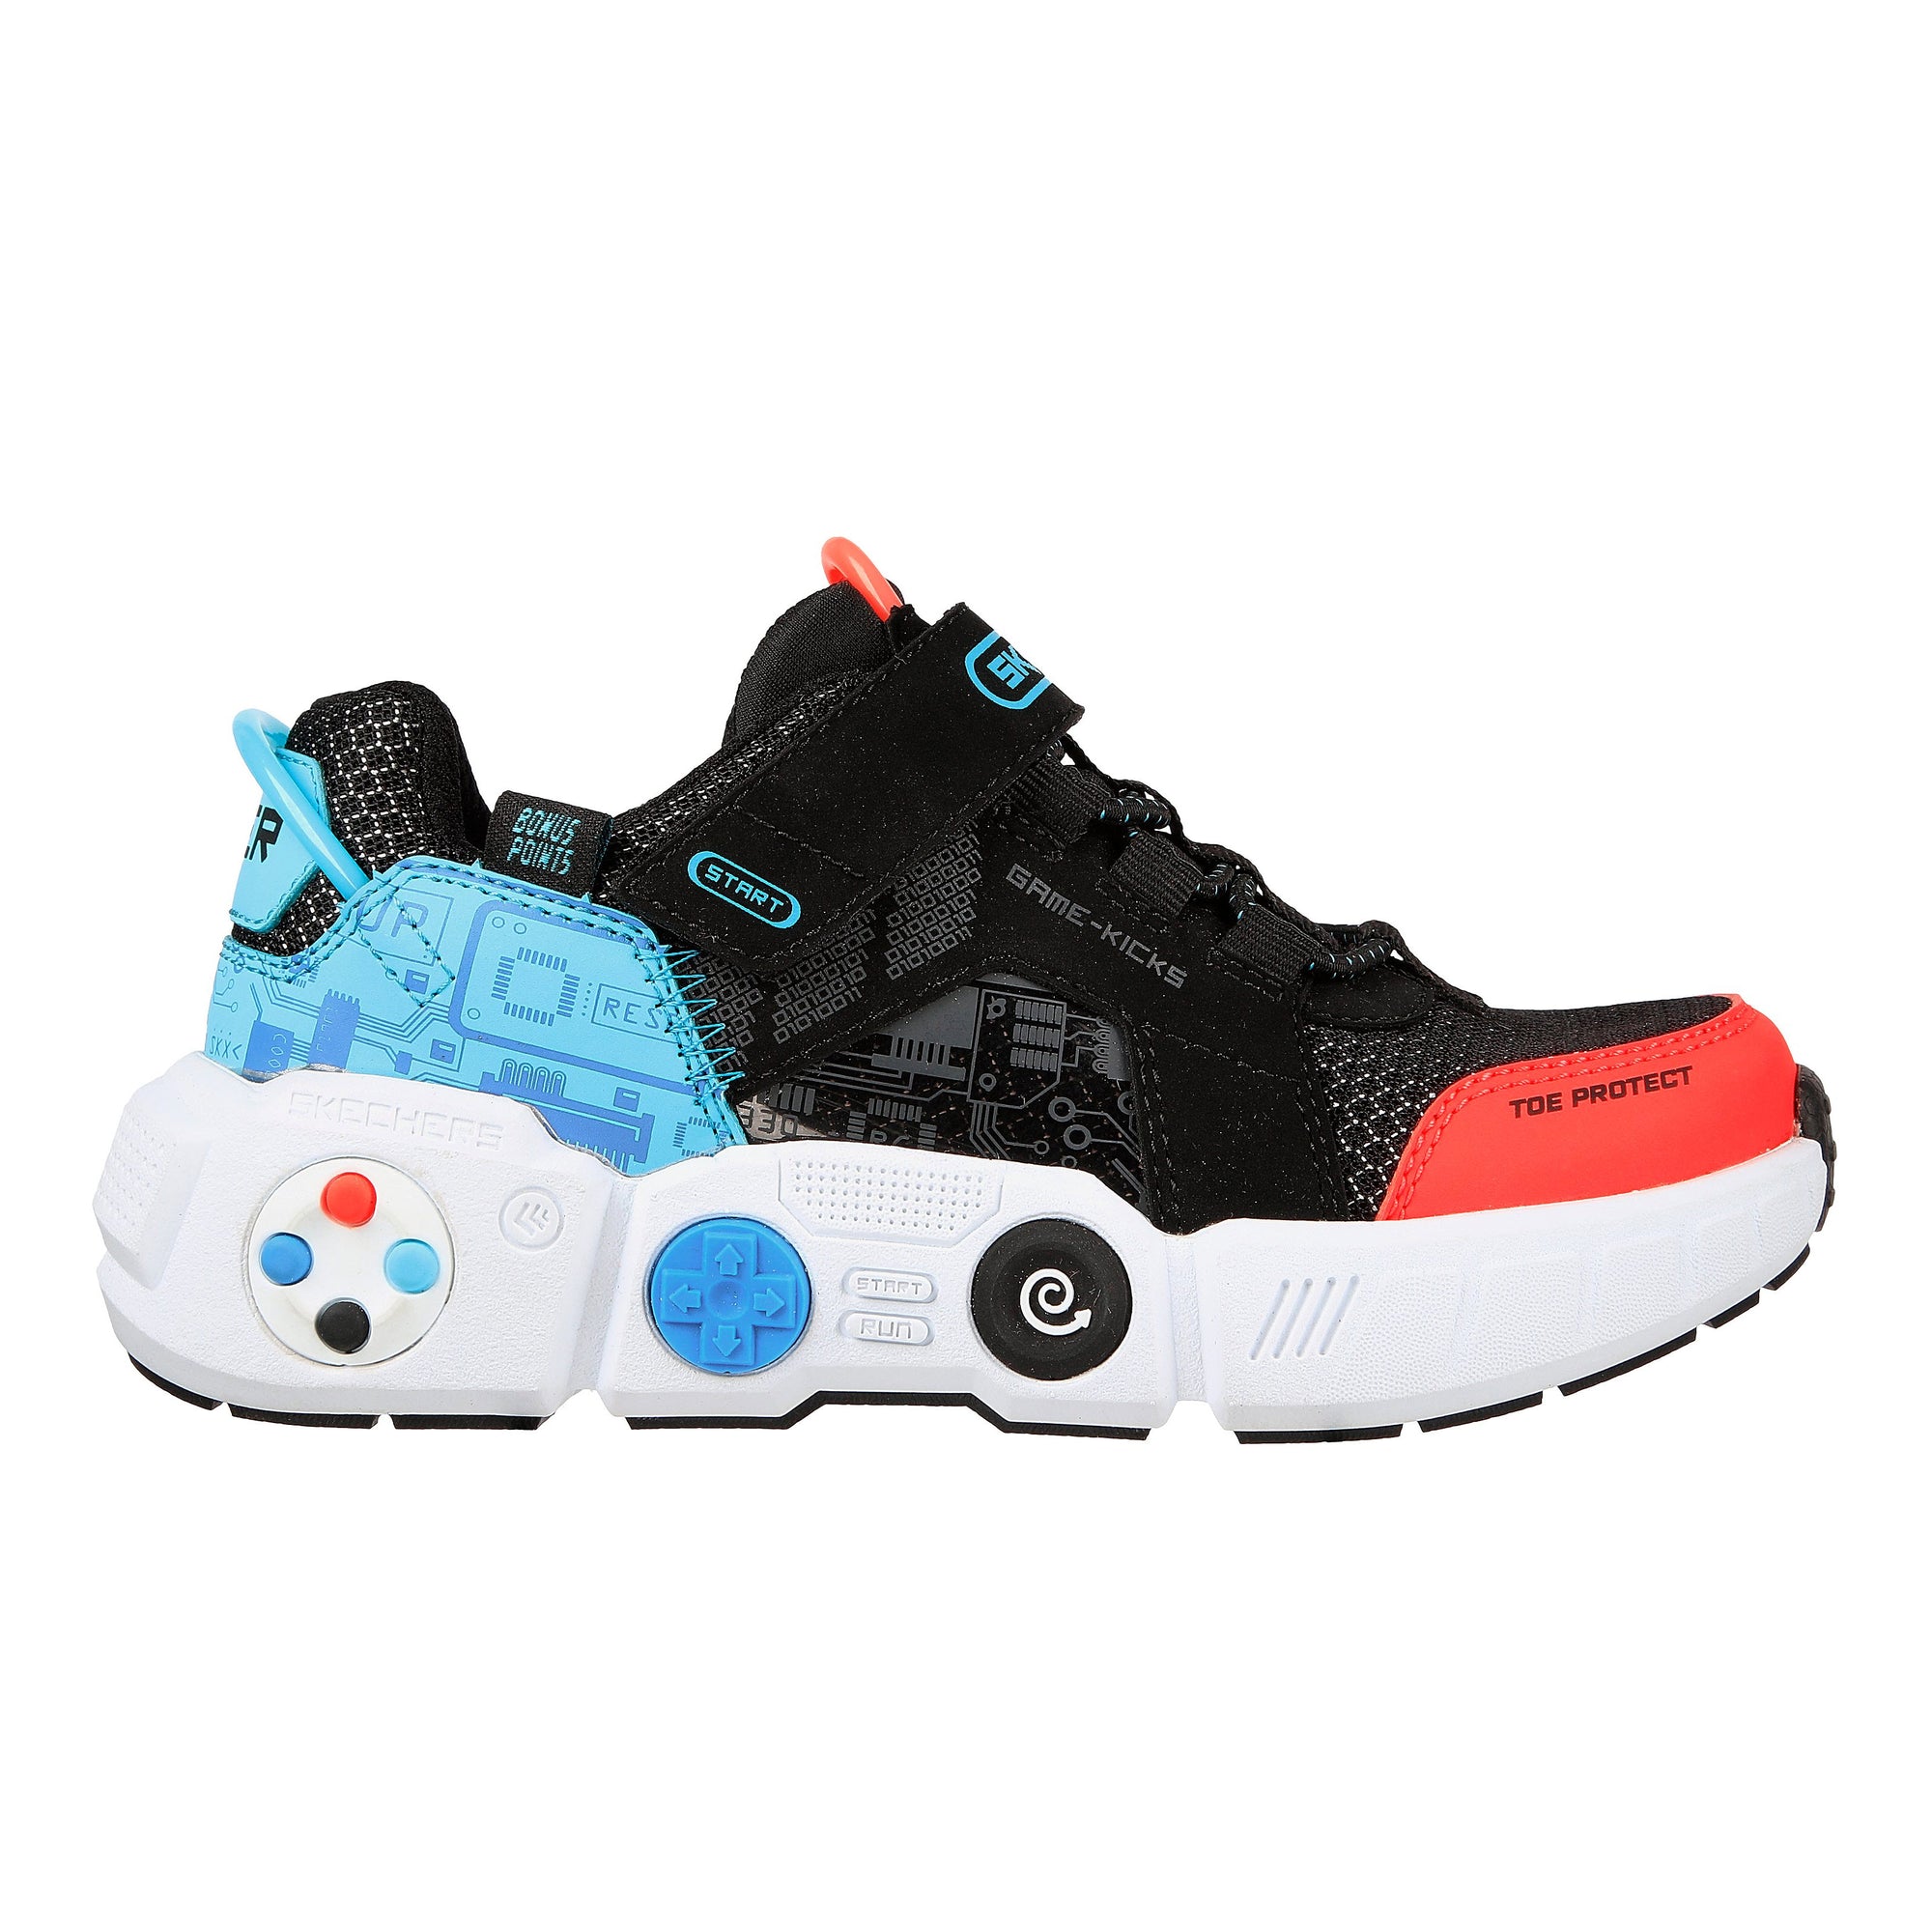 A black sneaker with a white sole and colorful design accents, featuring circuitry and gaming-inspired graphics from the Skechers Gametronix Black Multi - Kids collection, offering a durable rubber traction outsole.